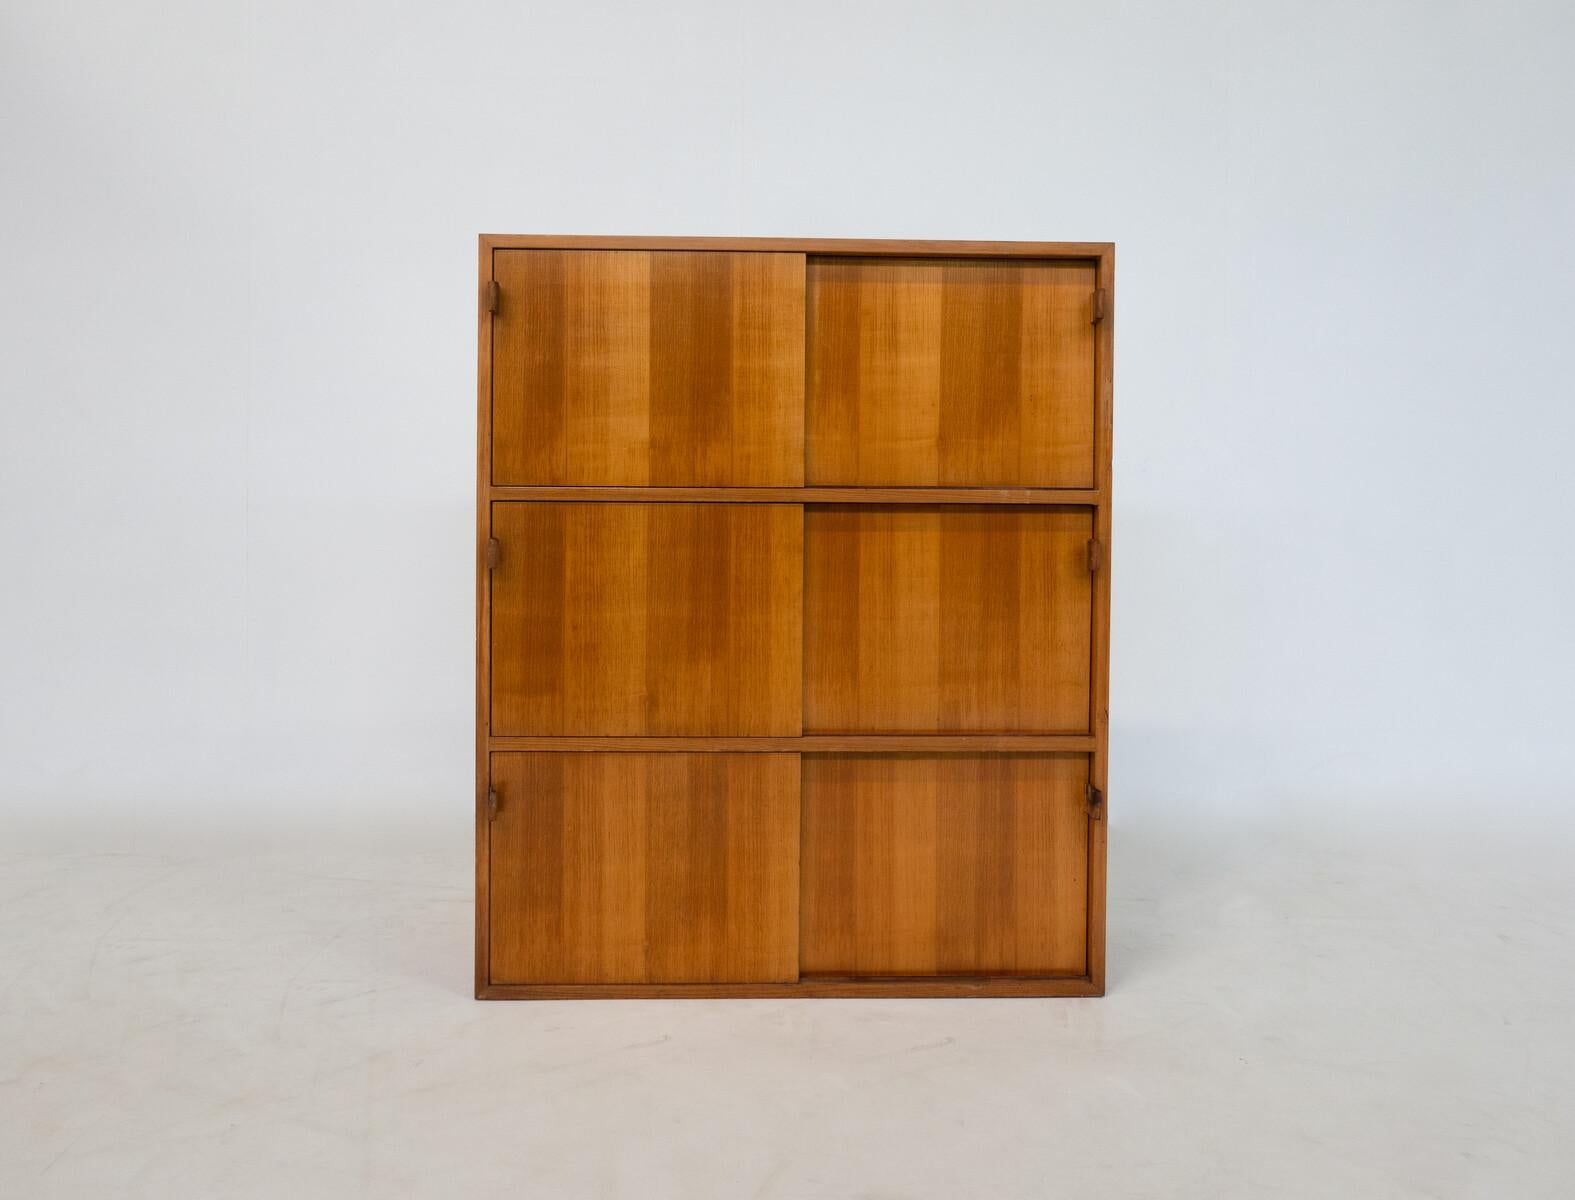 Mid-Century Modern wall unit by florence knoll, wood and leather, 1960s.